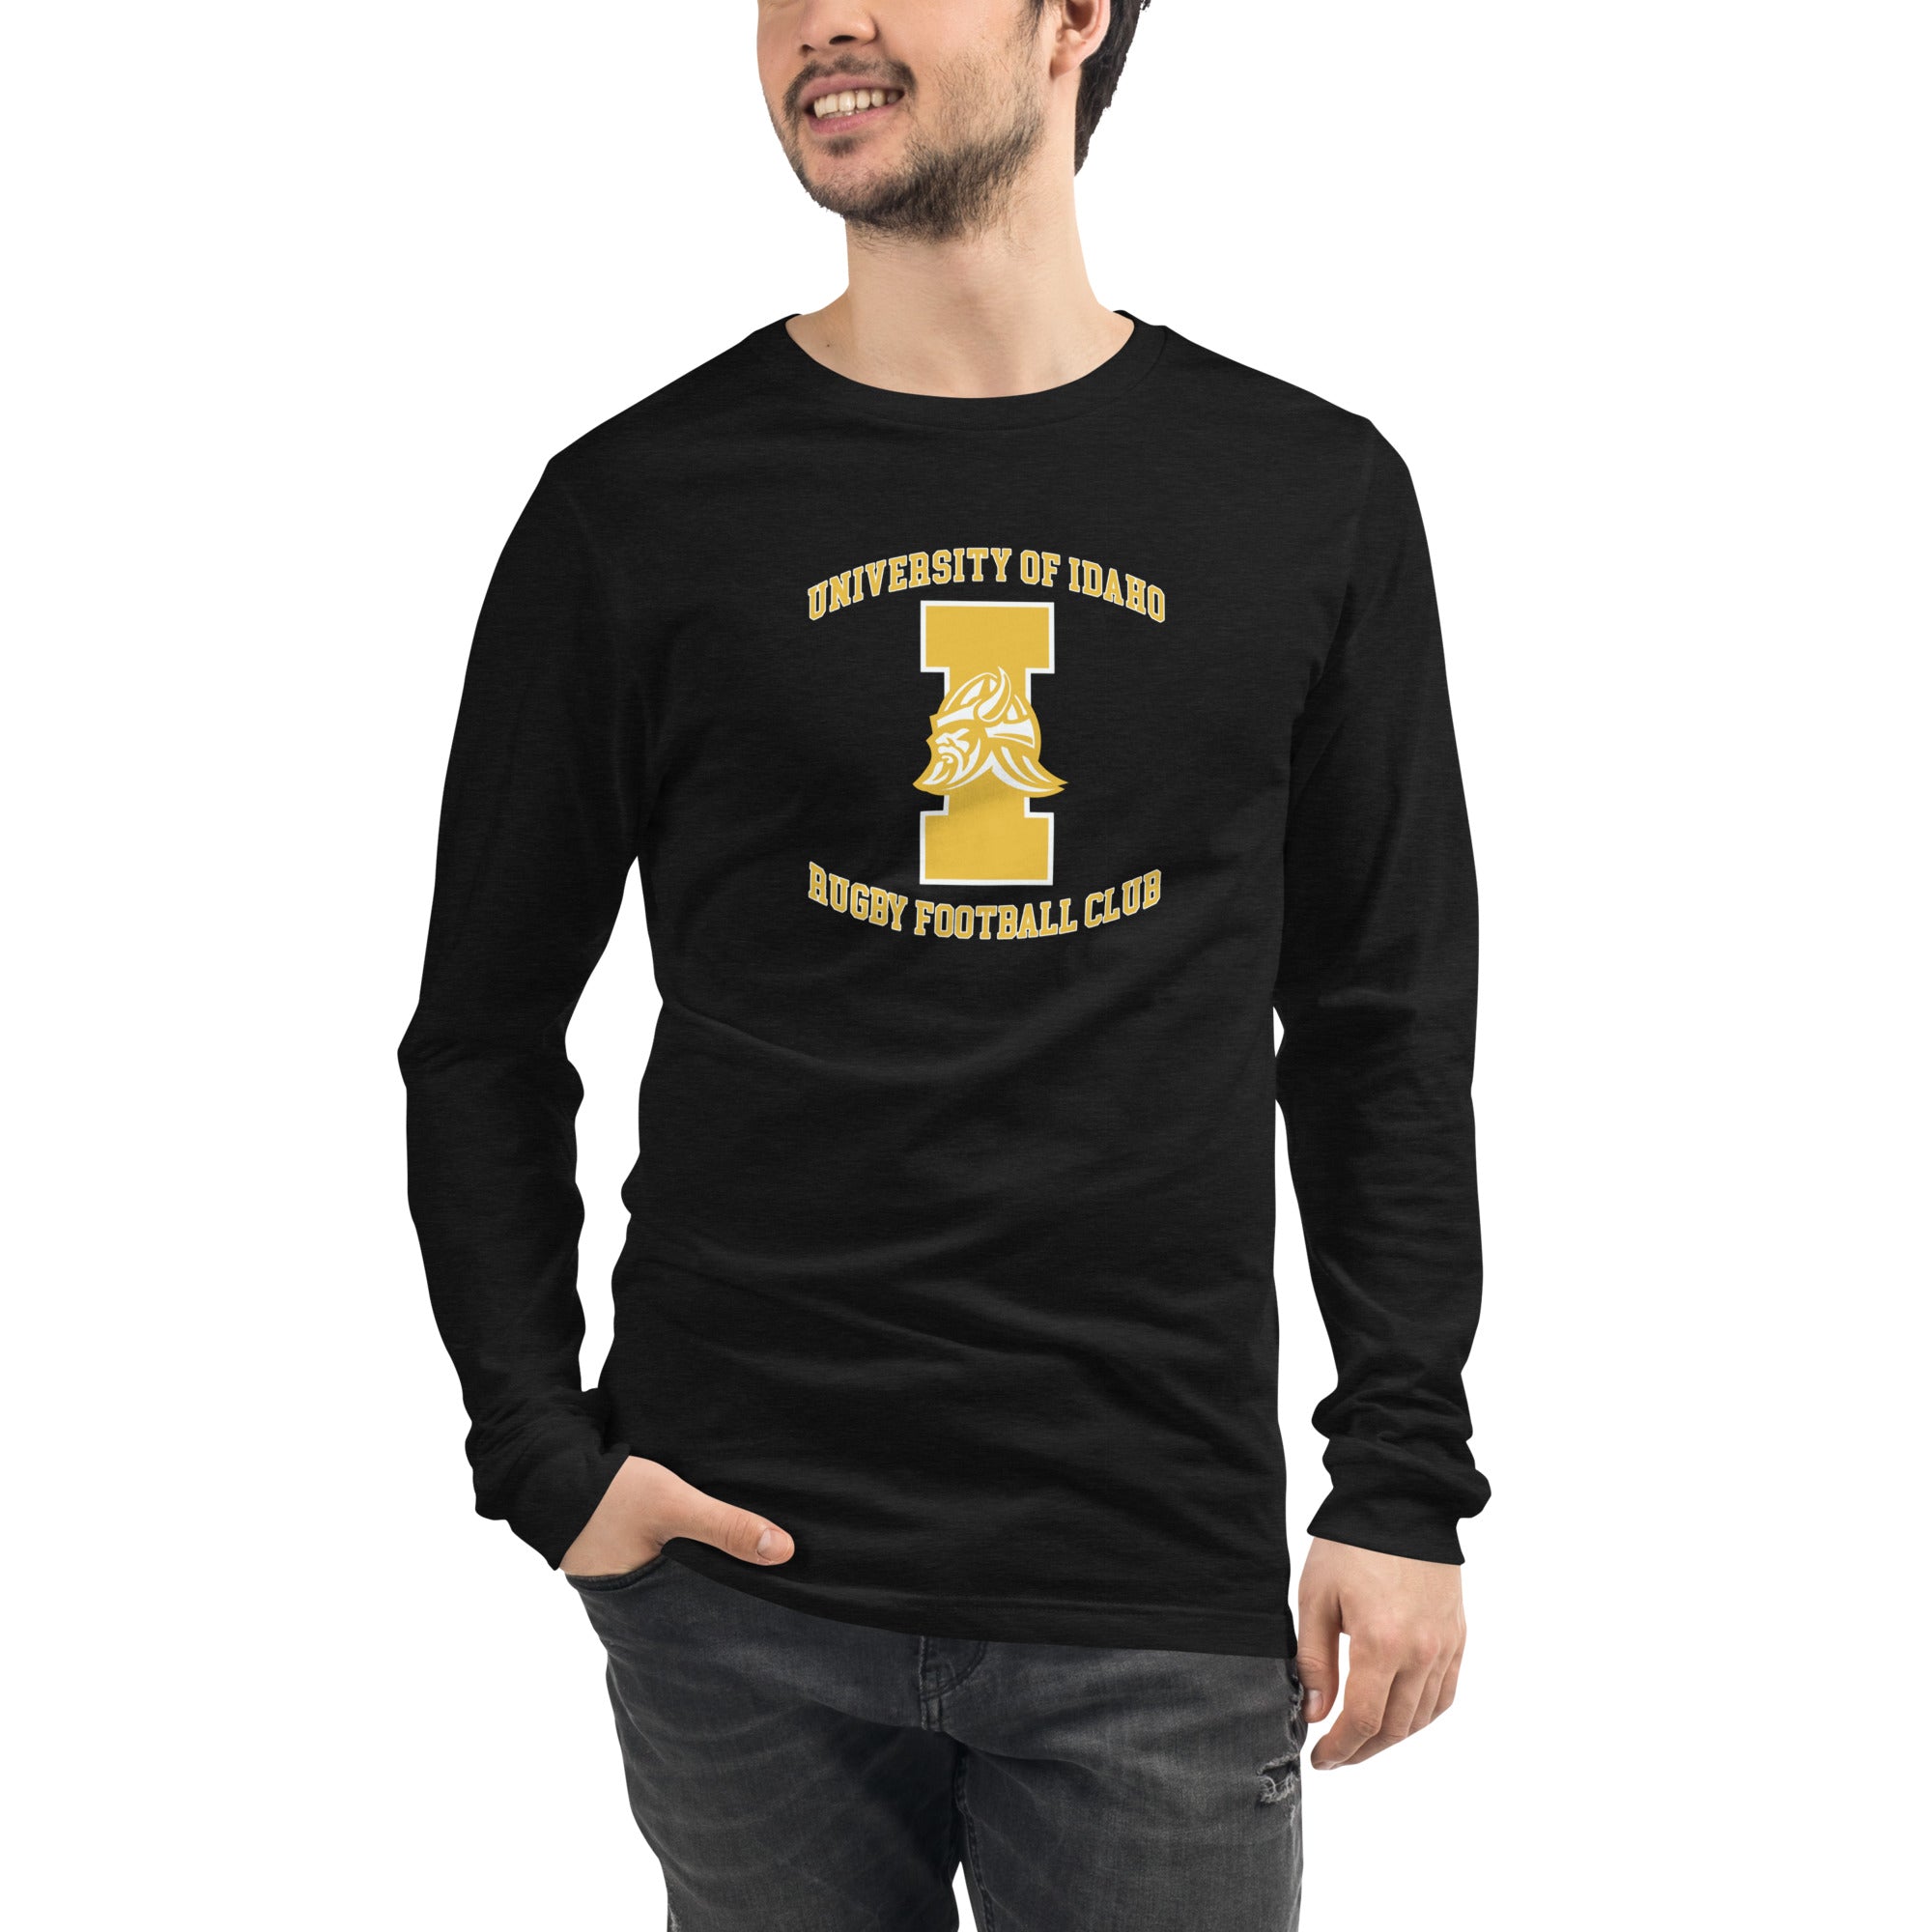 Rugby Imports Unisex Long Sleeve Tee